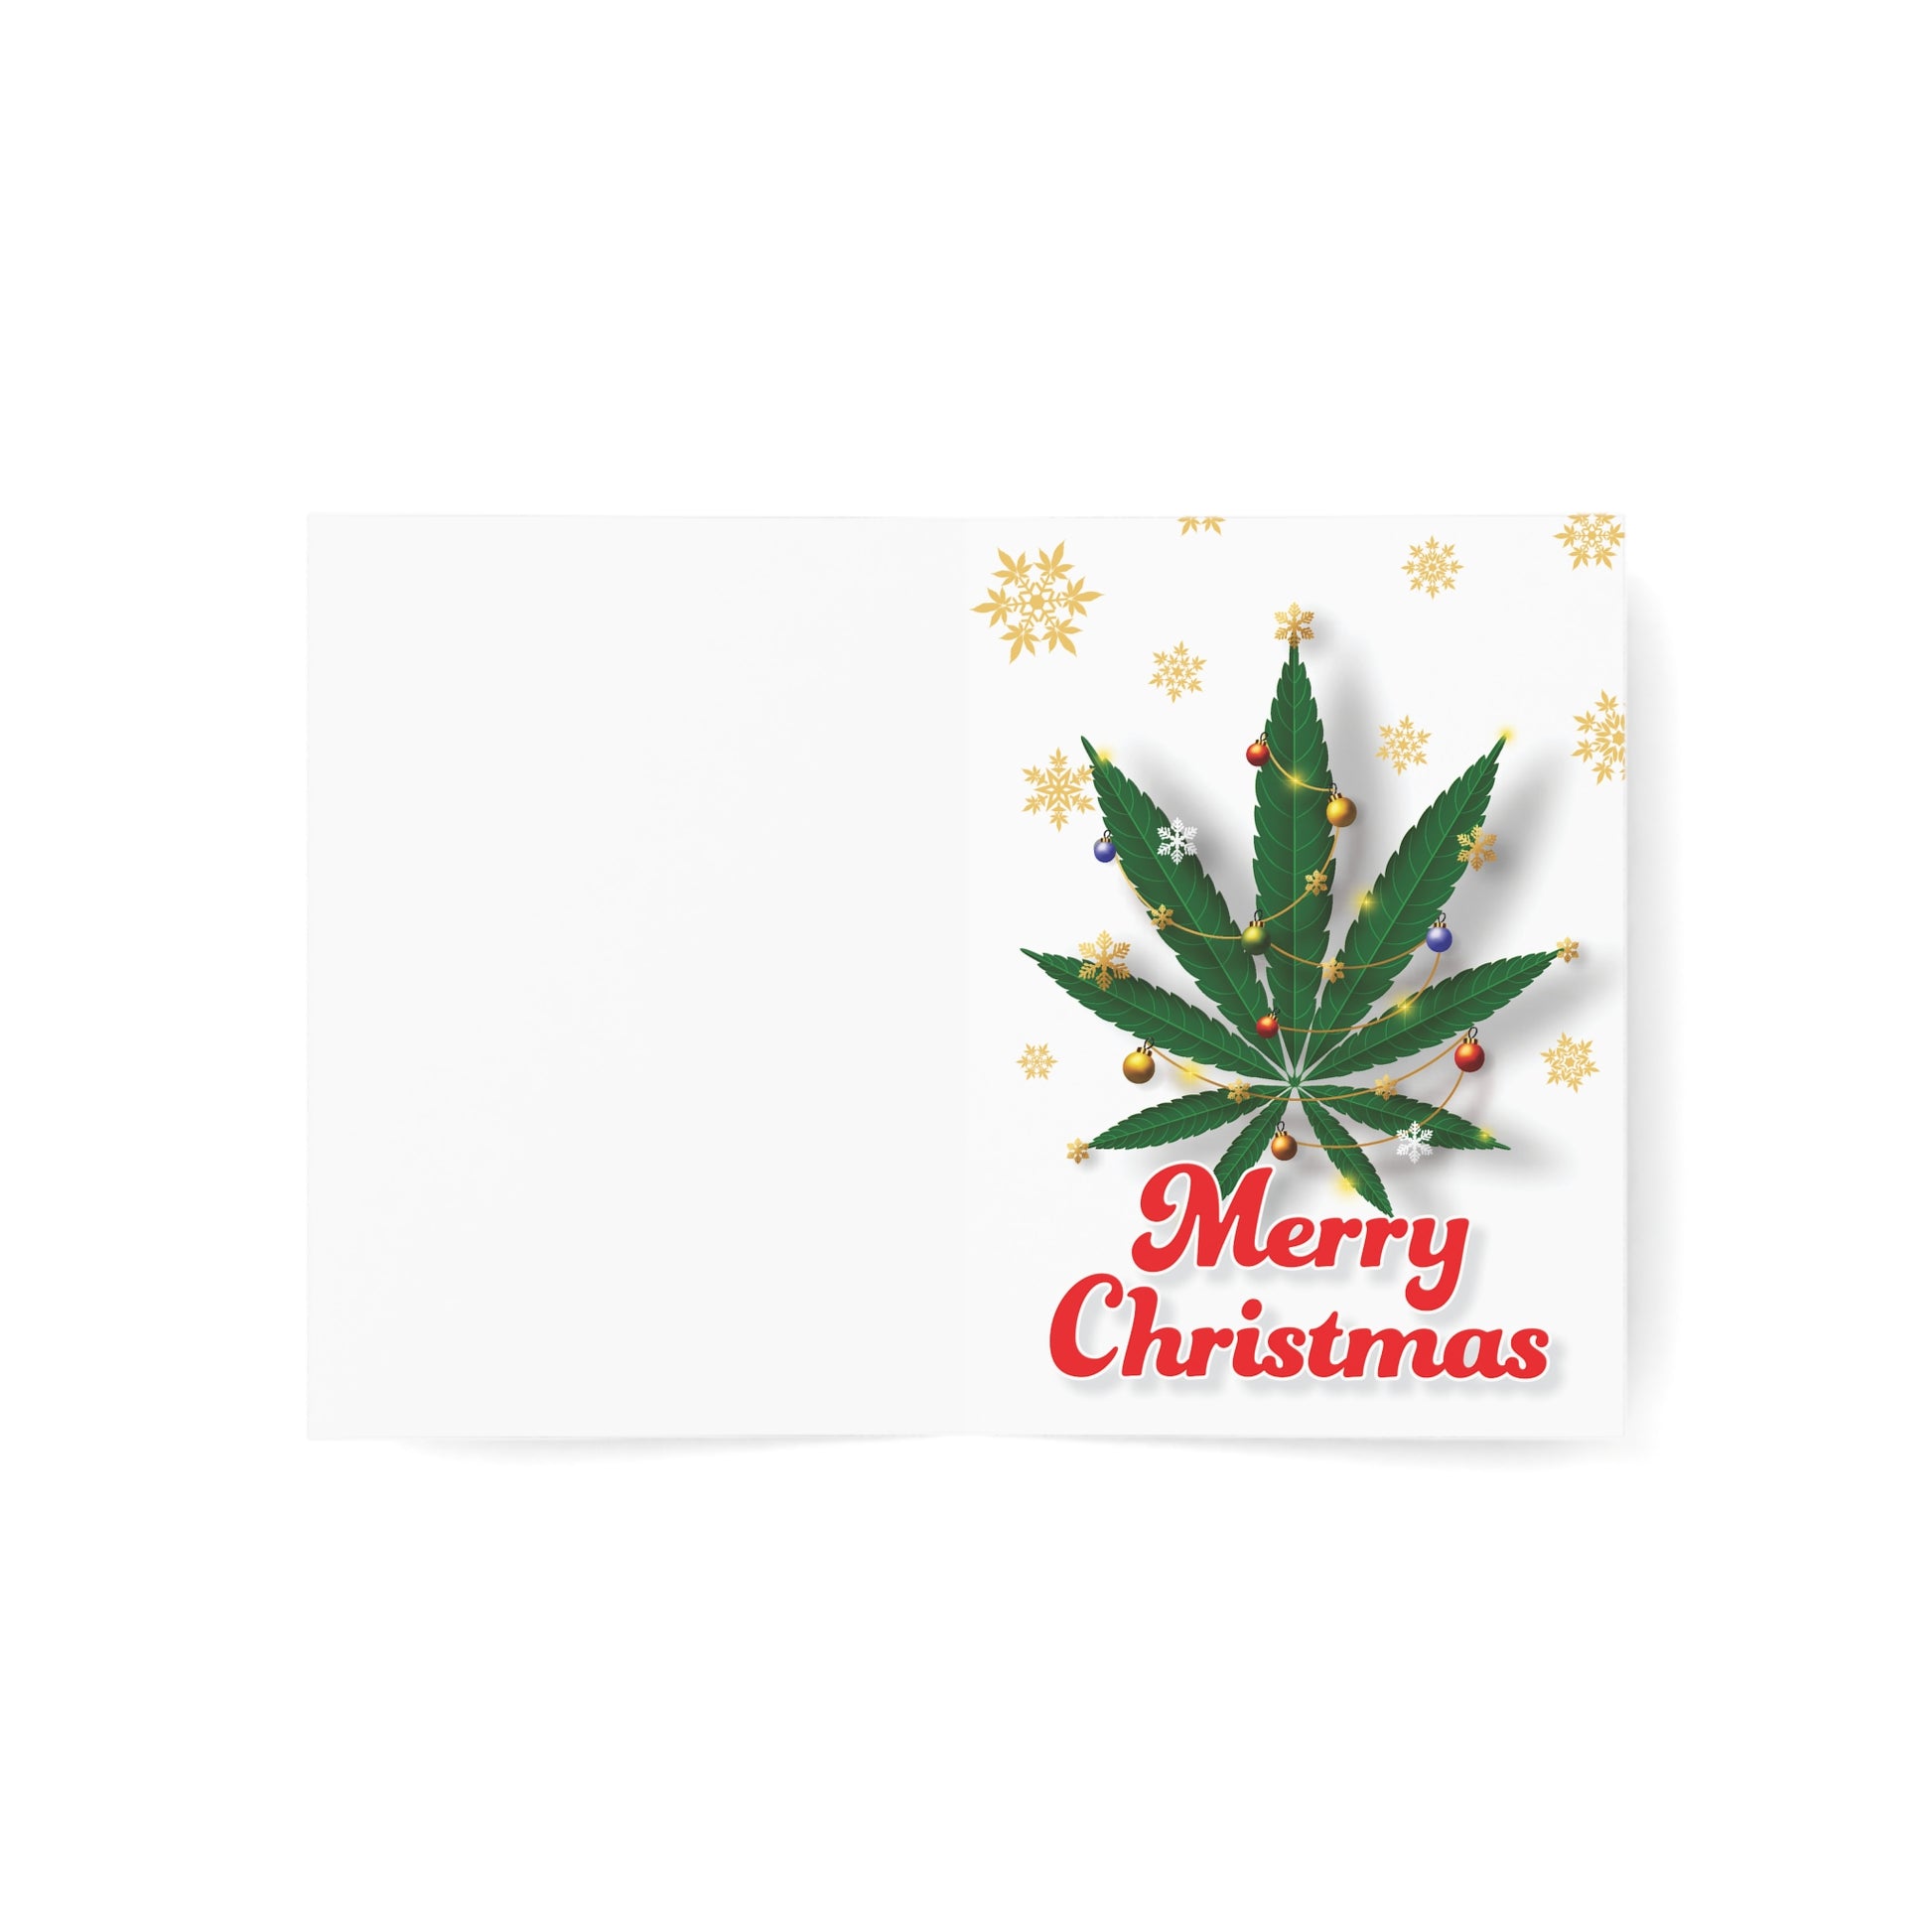 A whimsical Christmas card design featuring a large cannabis leaf adorned with colorful baubles and surrounded by golden snowflakes. Bold 'Merry Christmas' text in red is placed at the bottom against a white background.